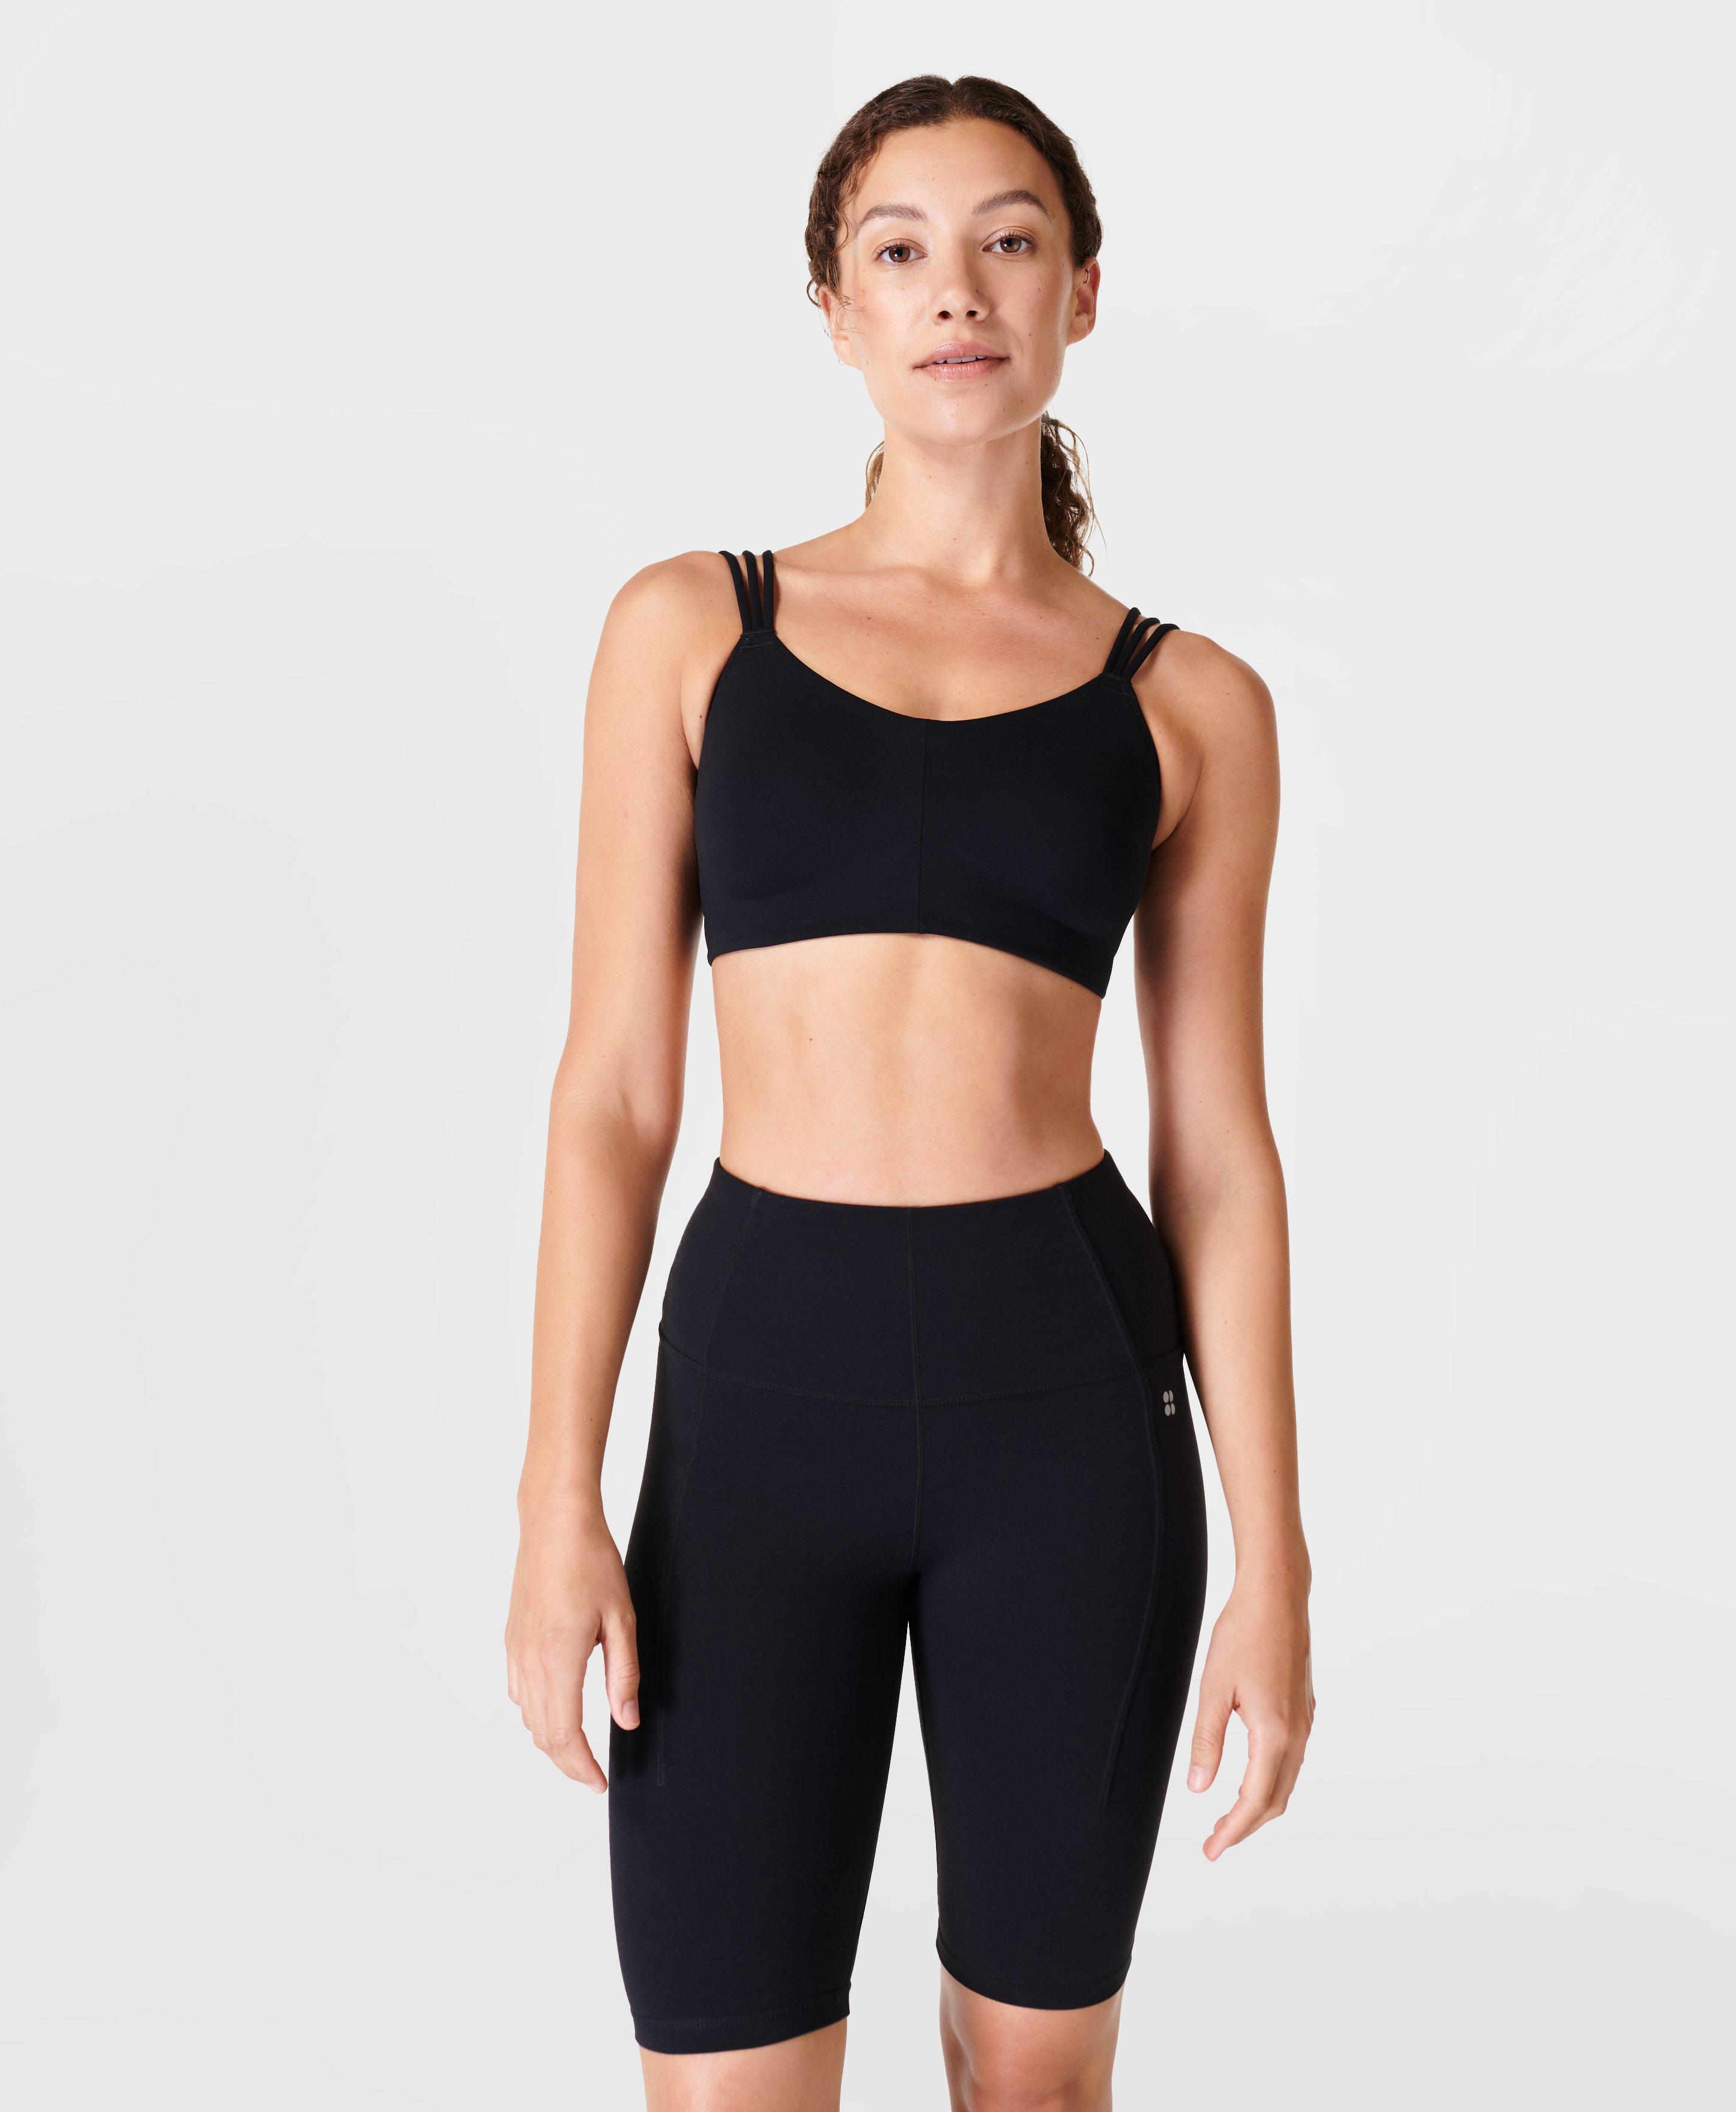 Sweat in Style: Buy Sports Bra Online and Up Your Workout Game